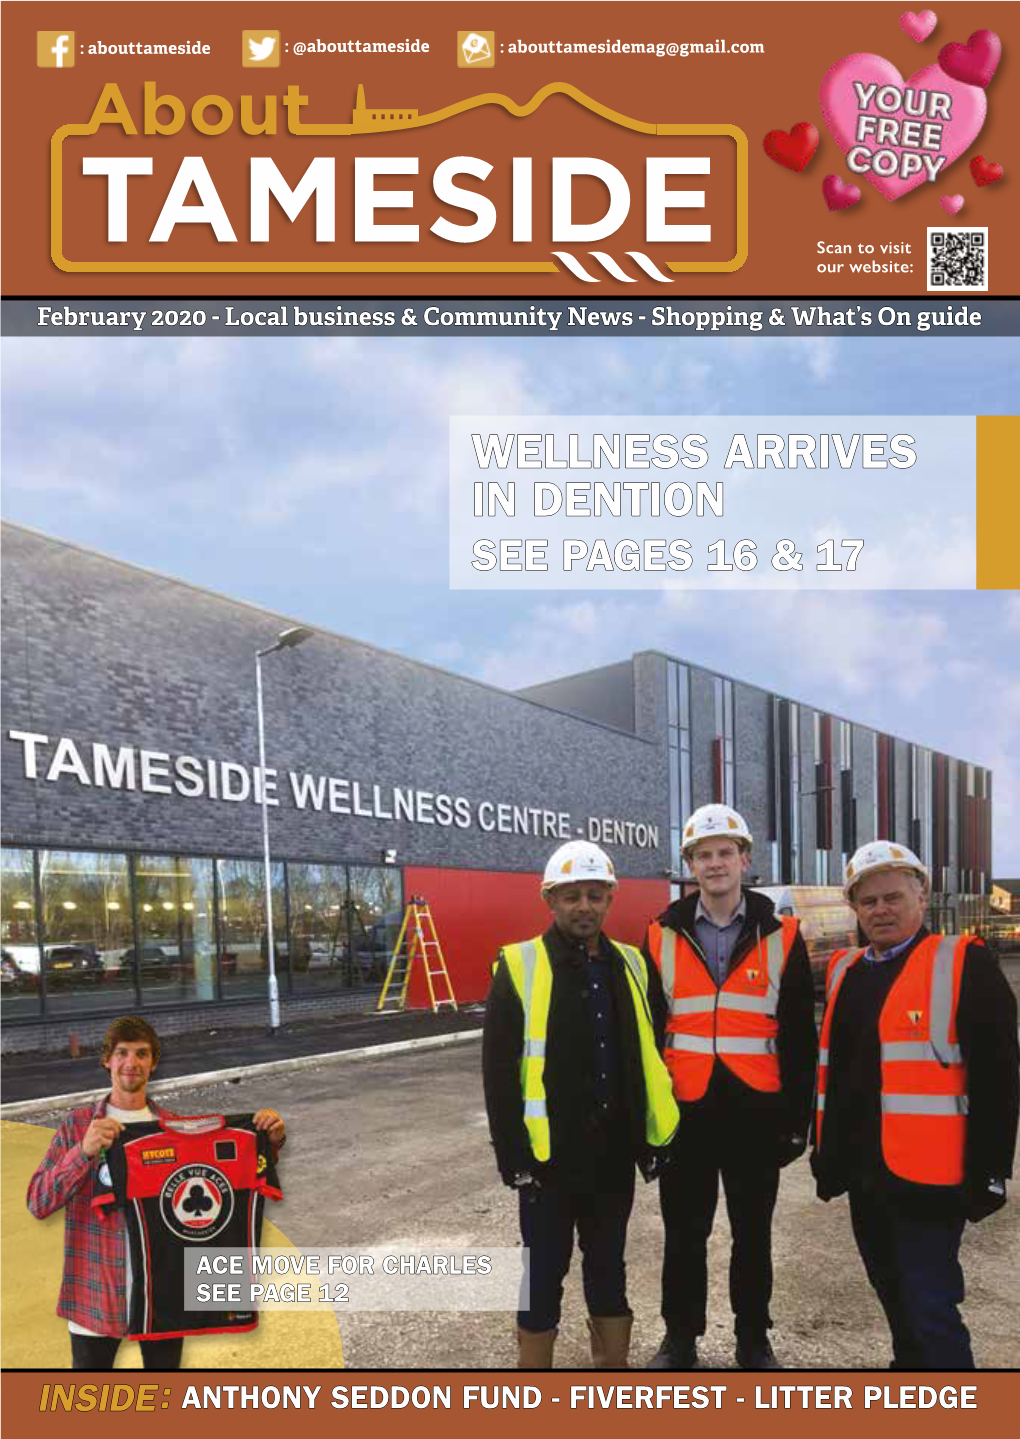 About Tameside 1 Mayor’S Welcome